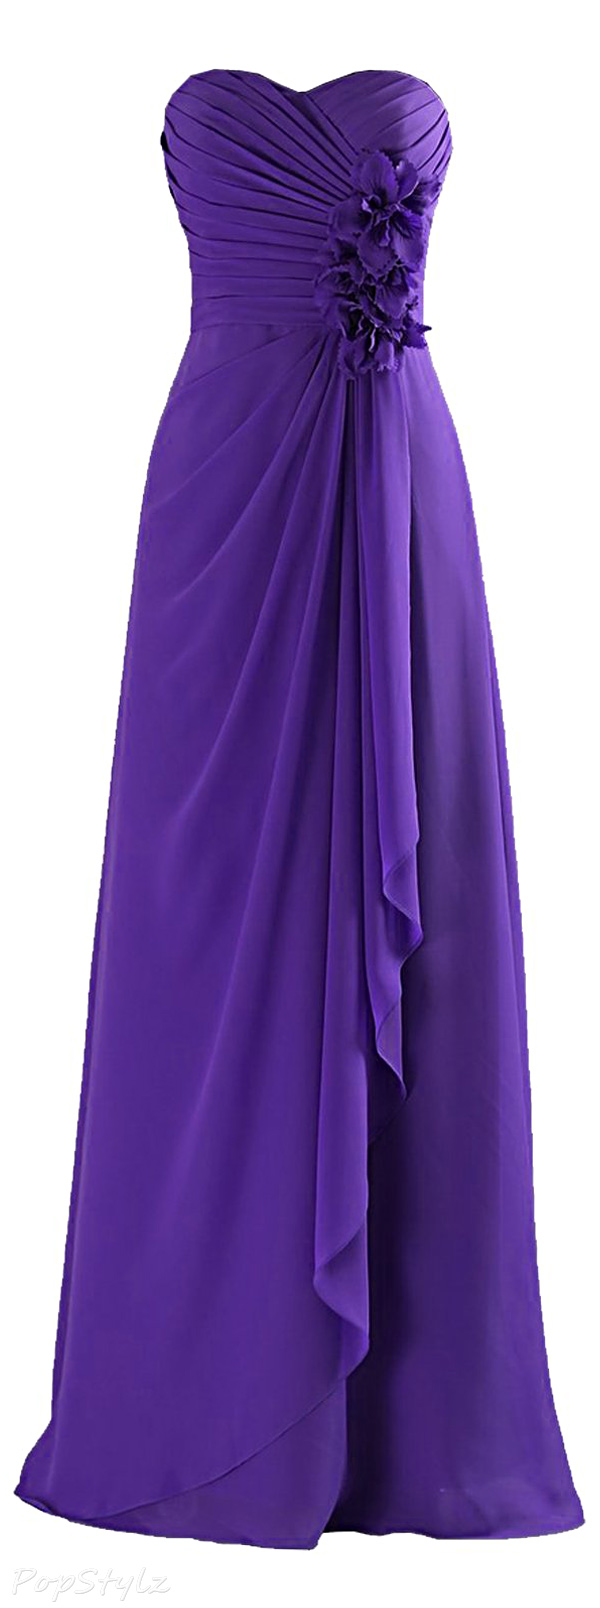 Sunvary Long Chiffon Formal Evening Gown